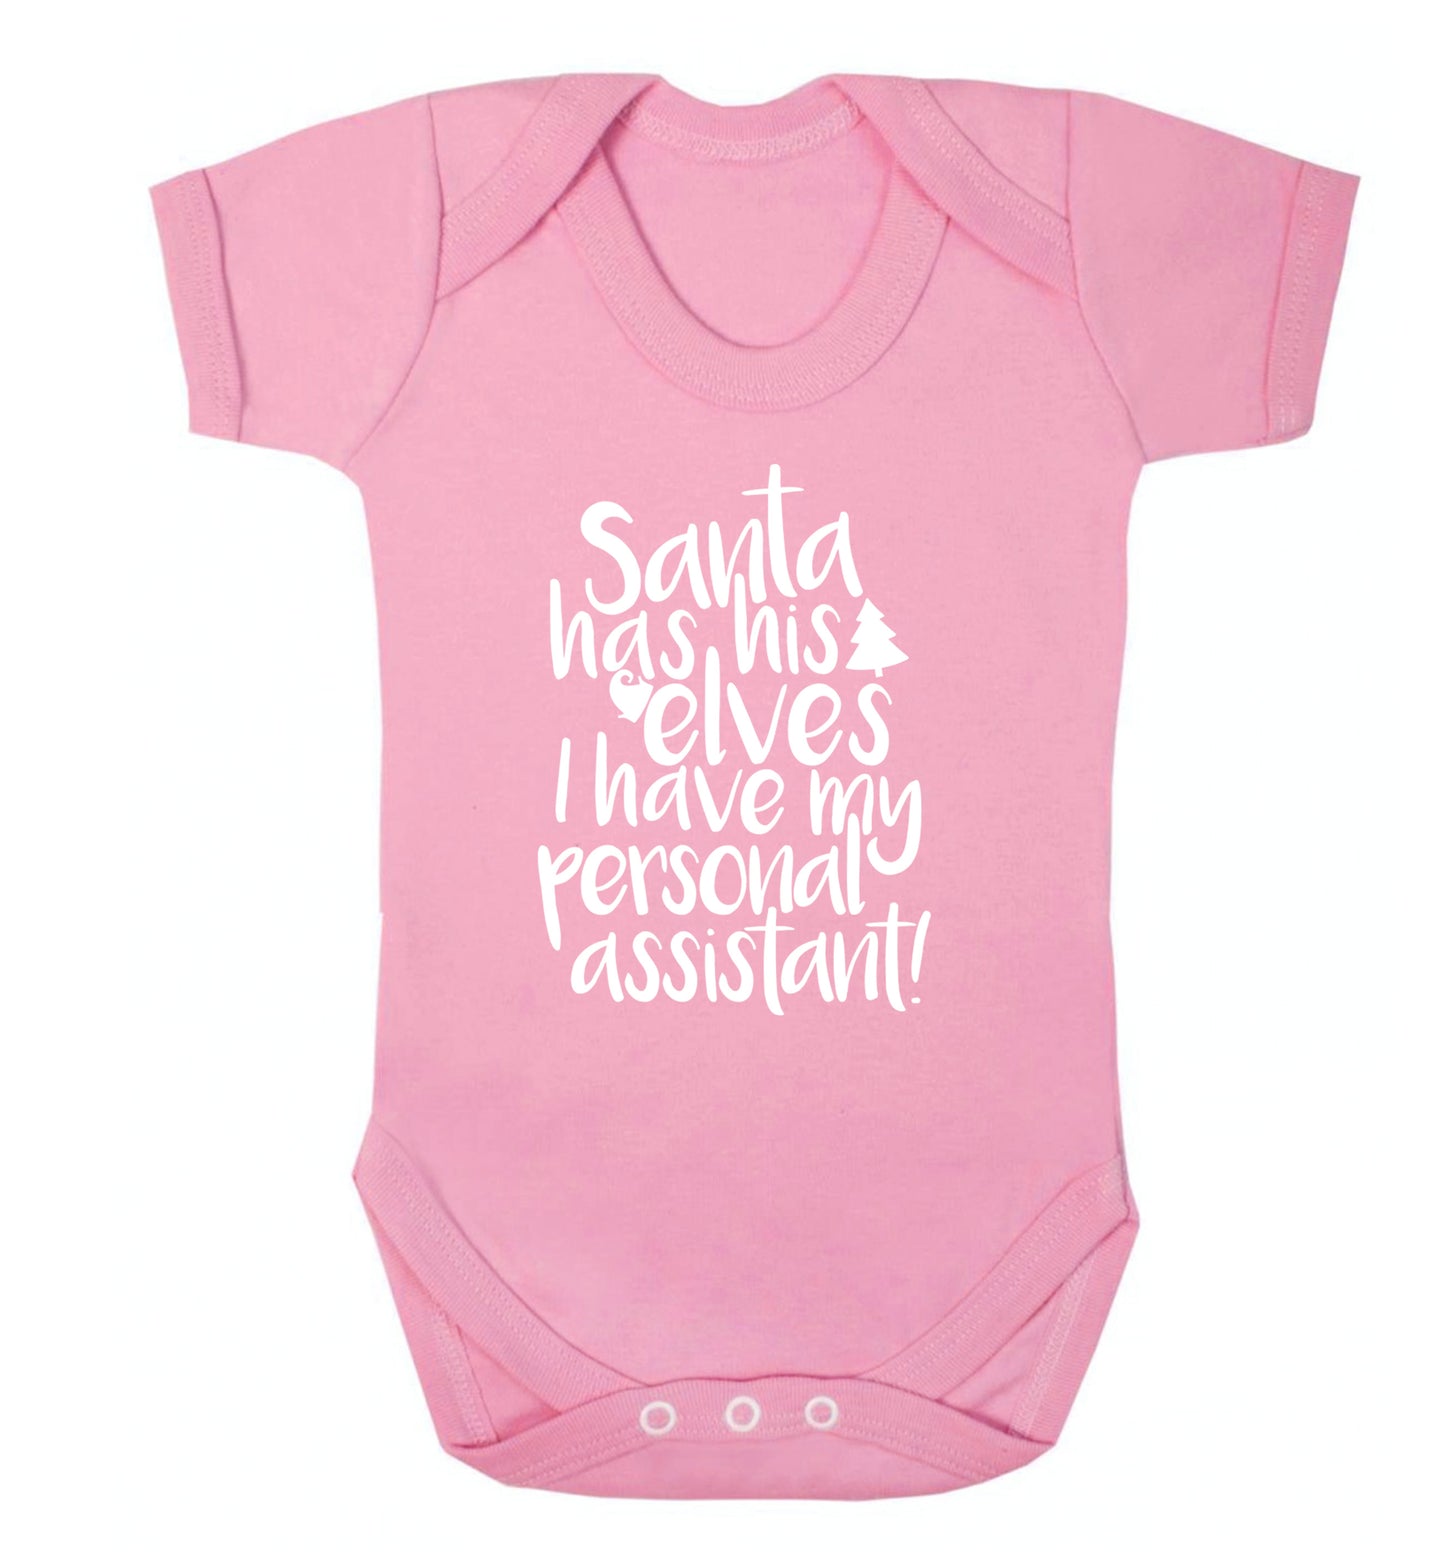 Santa has his elves I have my personal assistant Baby Vest pale pink 18-24 months